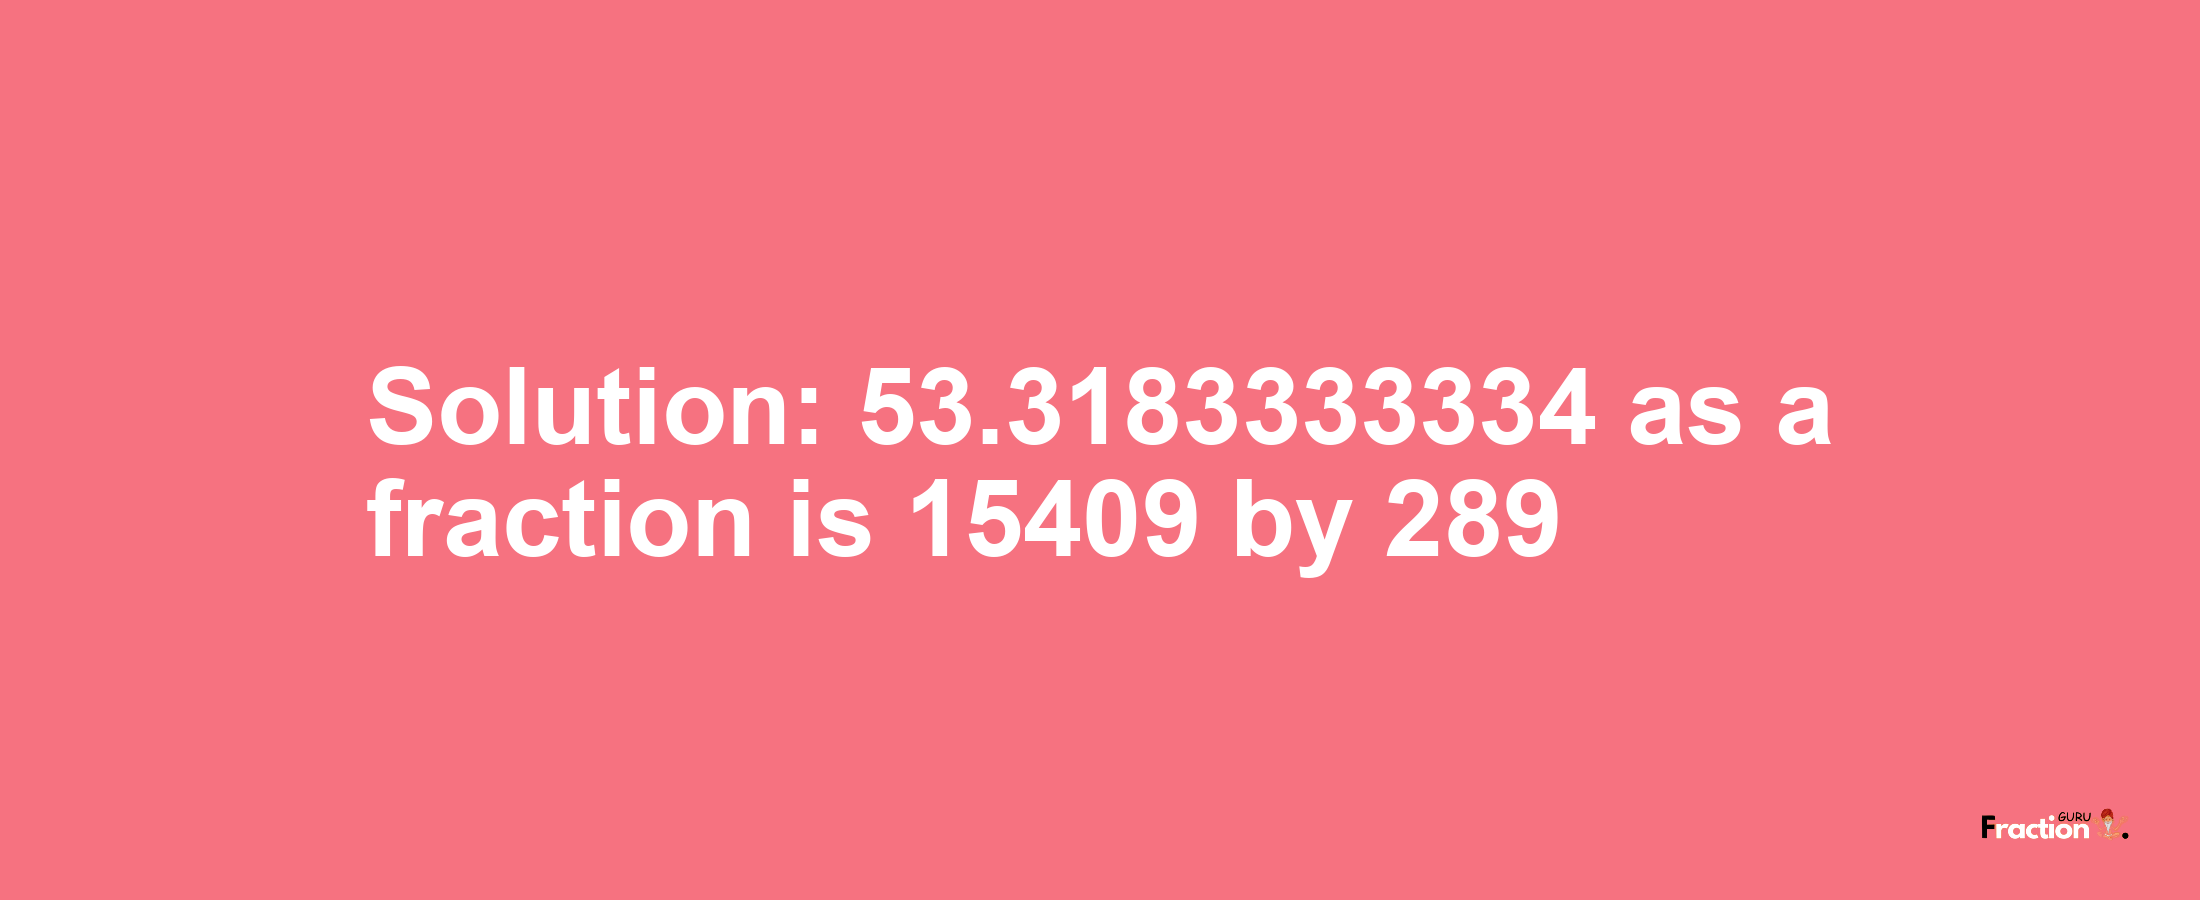 Solution:53.3183333334 as a fraction is 15409/289